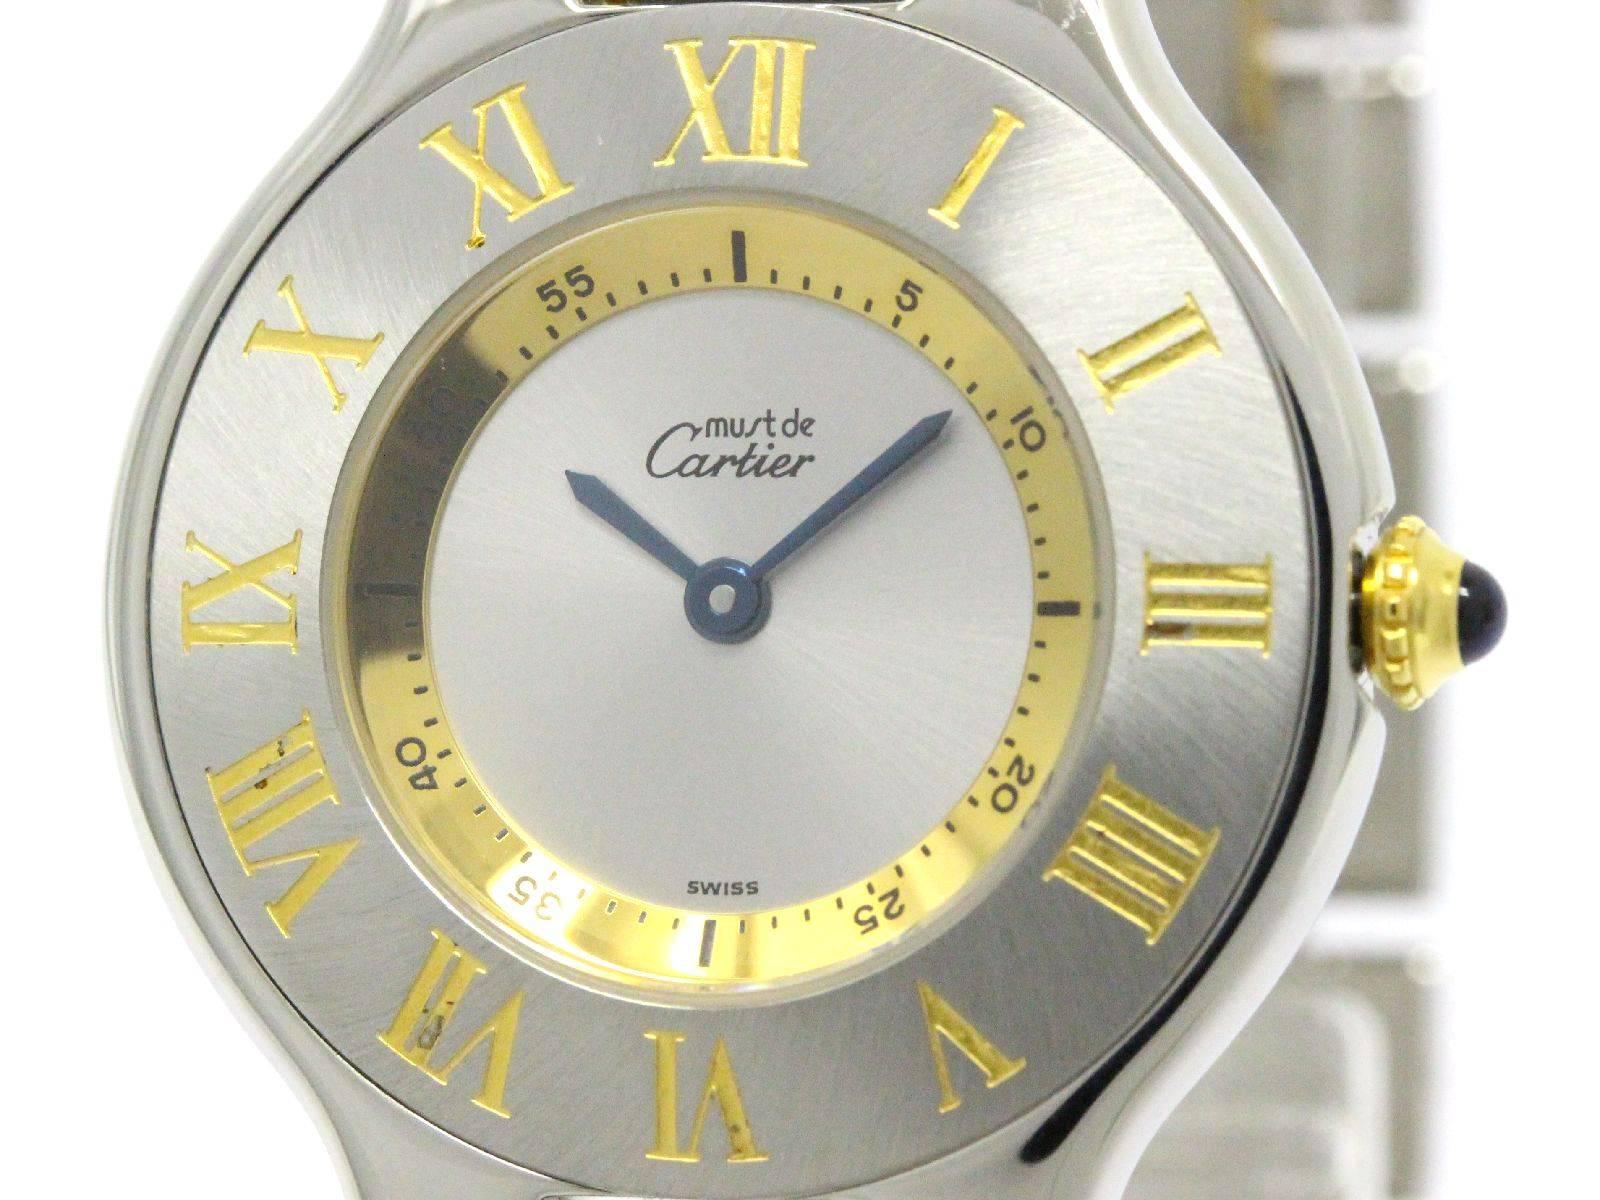 CURATOR'S NOTES

Yellow gold
Stainless steel
Quartz movement
Silver dial
Case diameter 31mm
Band 7.3